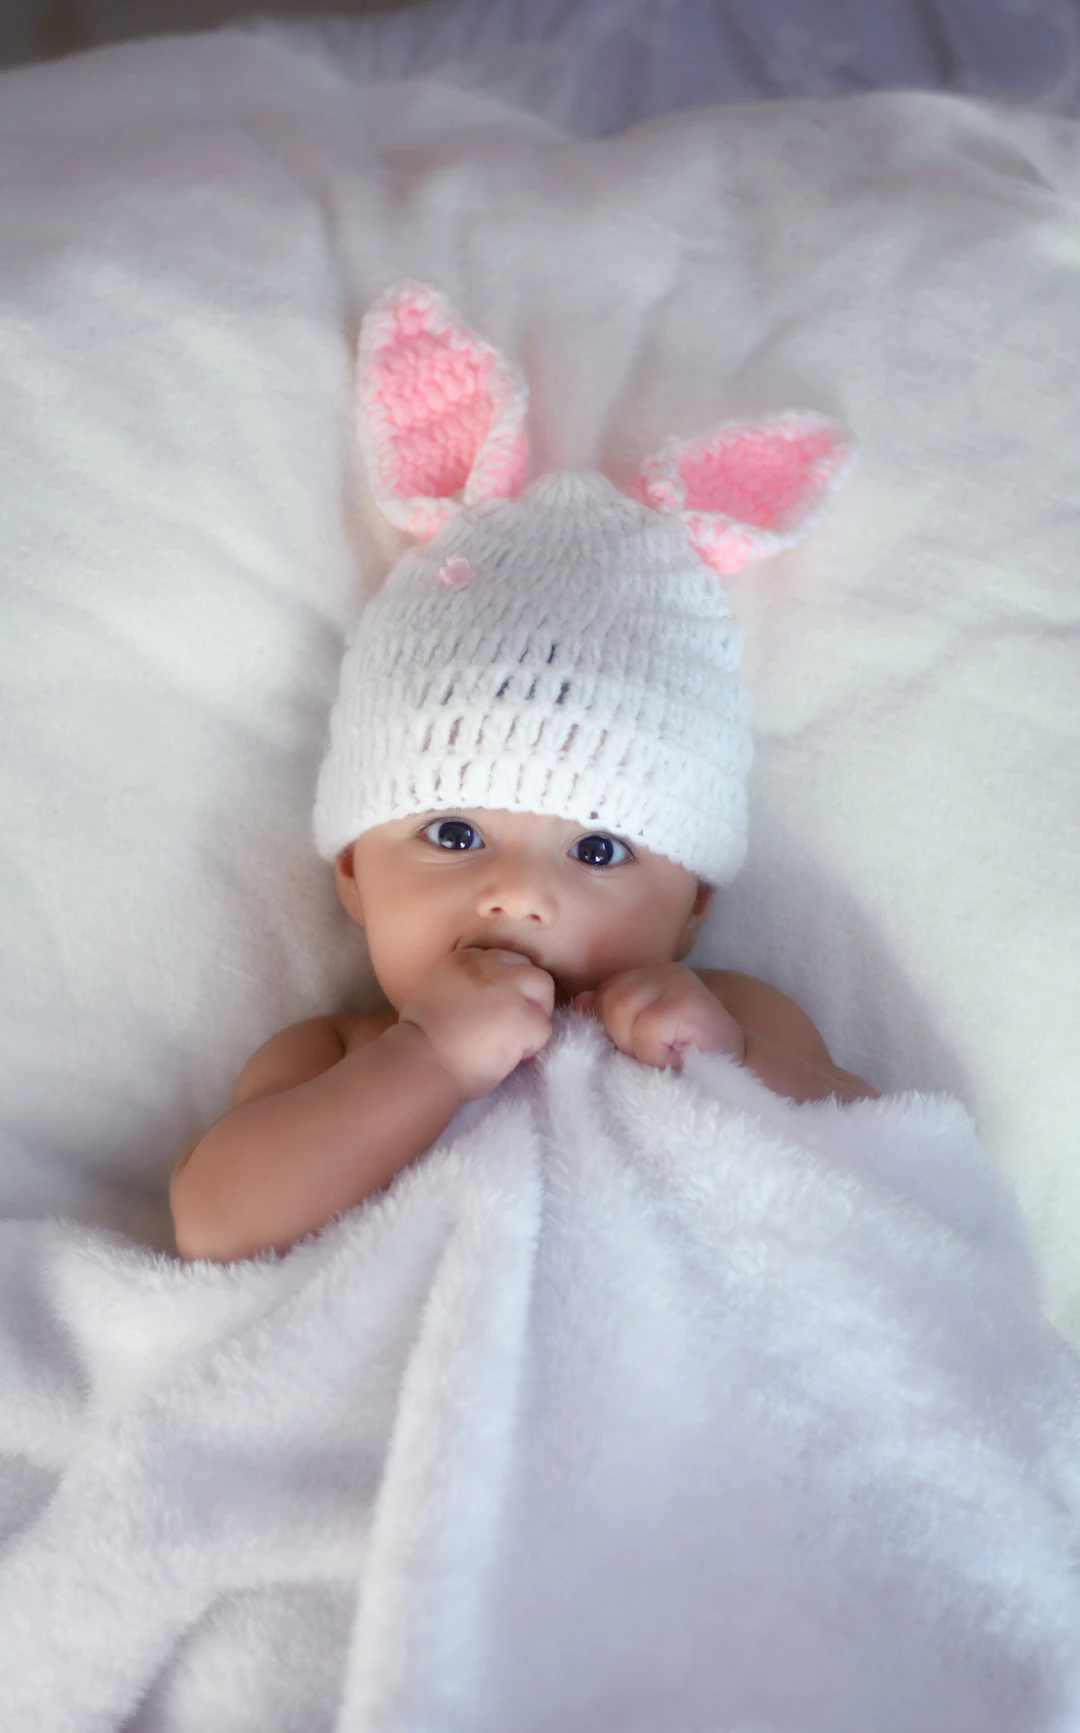 Baby wearing a bunny hat lying on a white blanket.